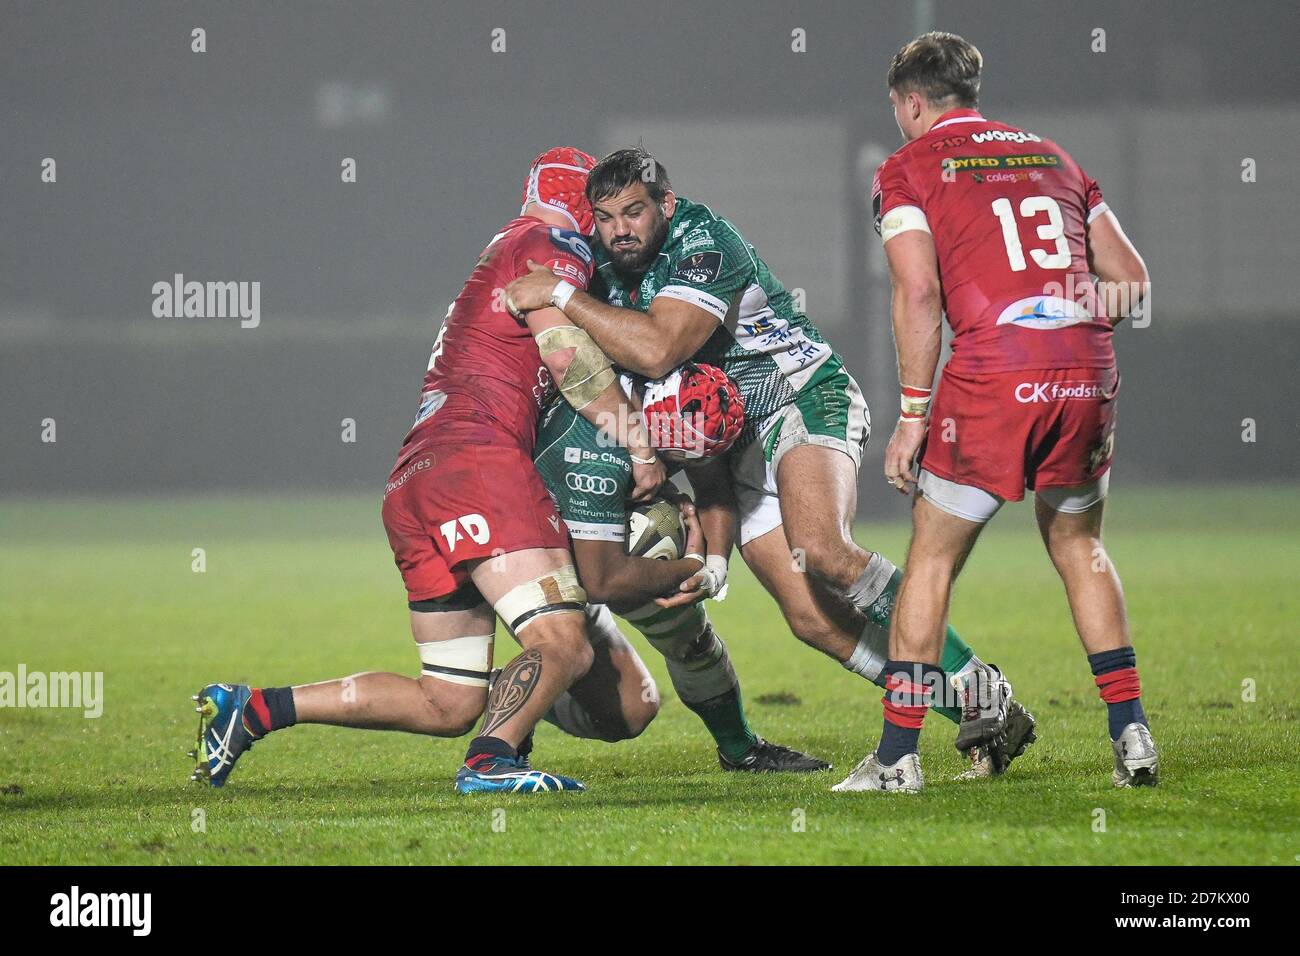 Stadio Comunale di Monigo, Treviso, Italy, 23 Oct 2020, Hame Faiva  (Treviso) tackled by Blade Thomson (Scarlets) helped by Nicola Quaglio  (Treviso) during Benetton Treviso vs Scarlets Rugby, Rugby Guinness Pro 14